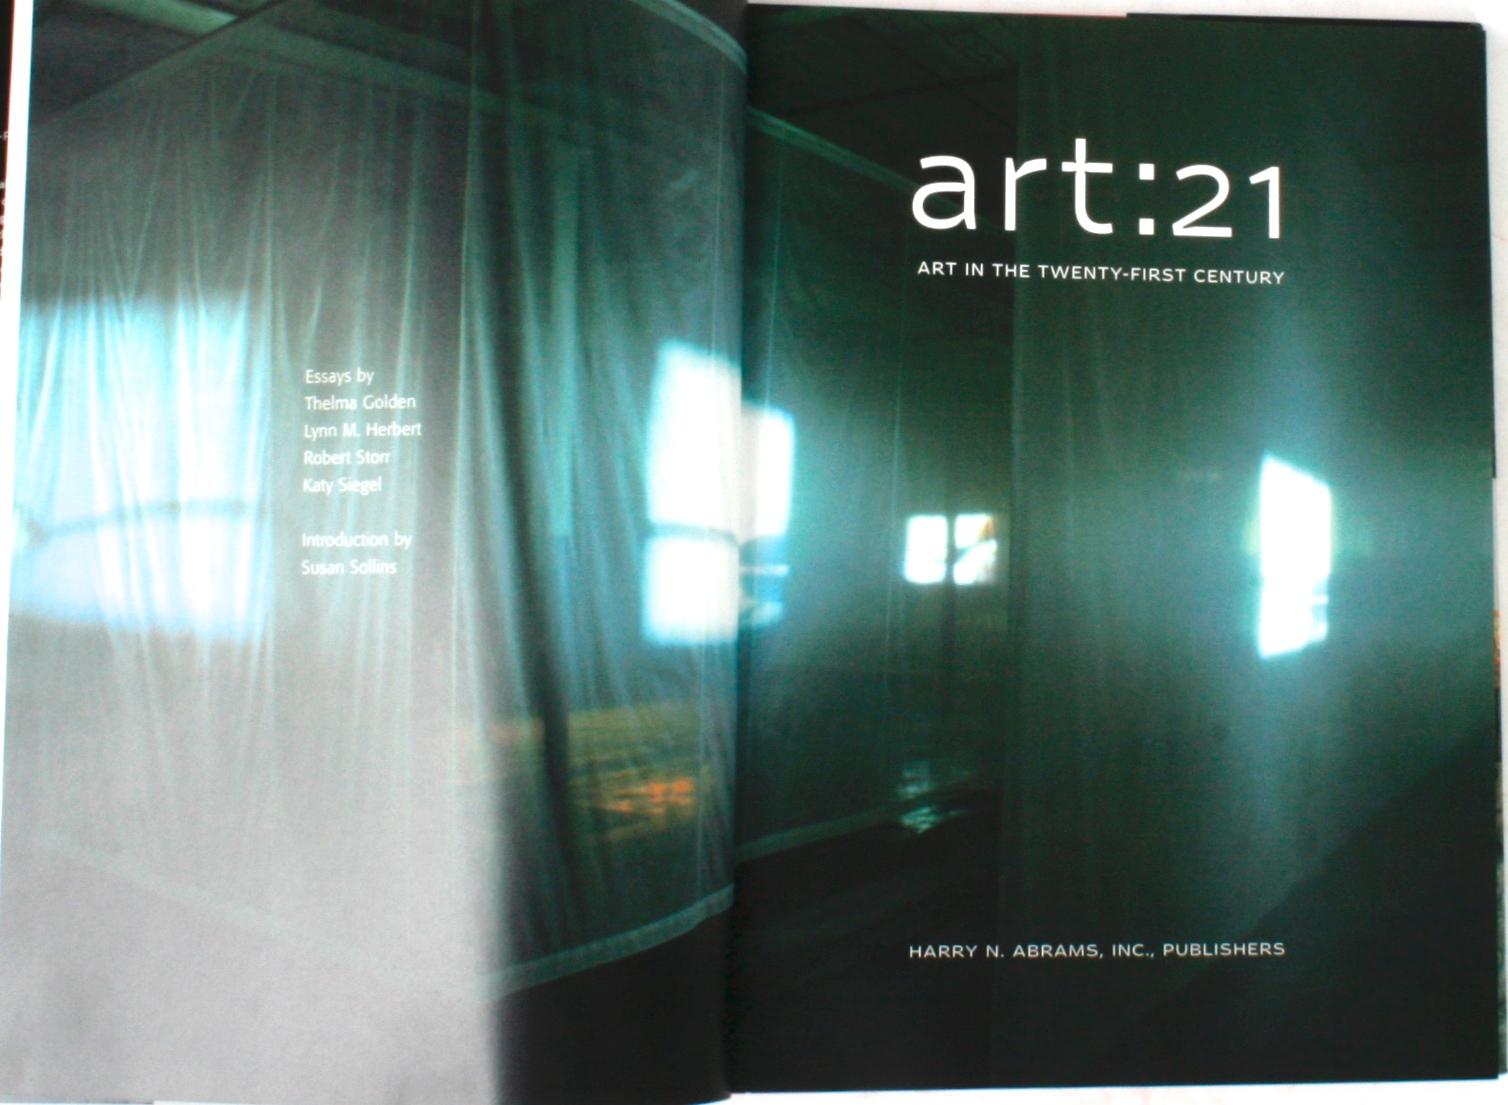 Art:21, art in the 21st century. New York: Harry N. Abrams, Inc., 2001. Hardcover with dust jacket. 216 pp. A companion volume to a PBS series which introduced 21 artists working in the 21st century using a wide spectrum of media. Among the artists